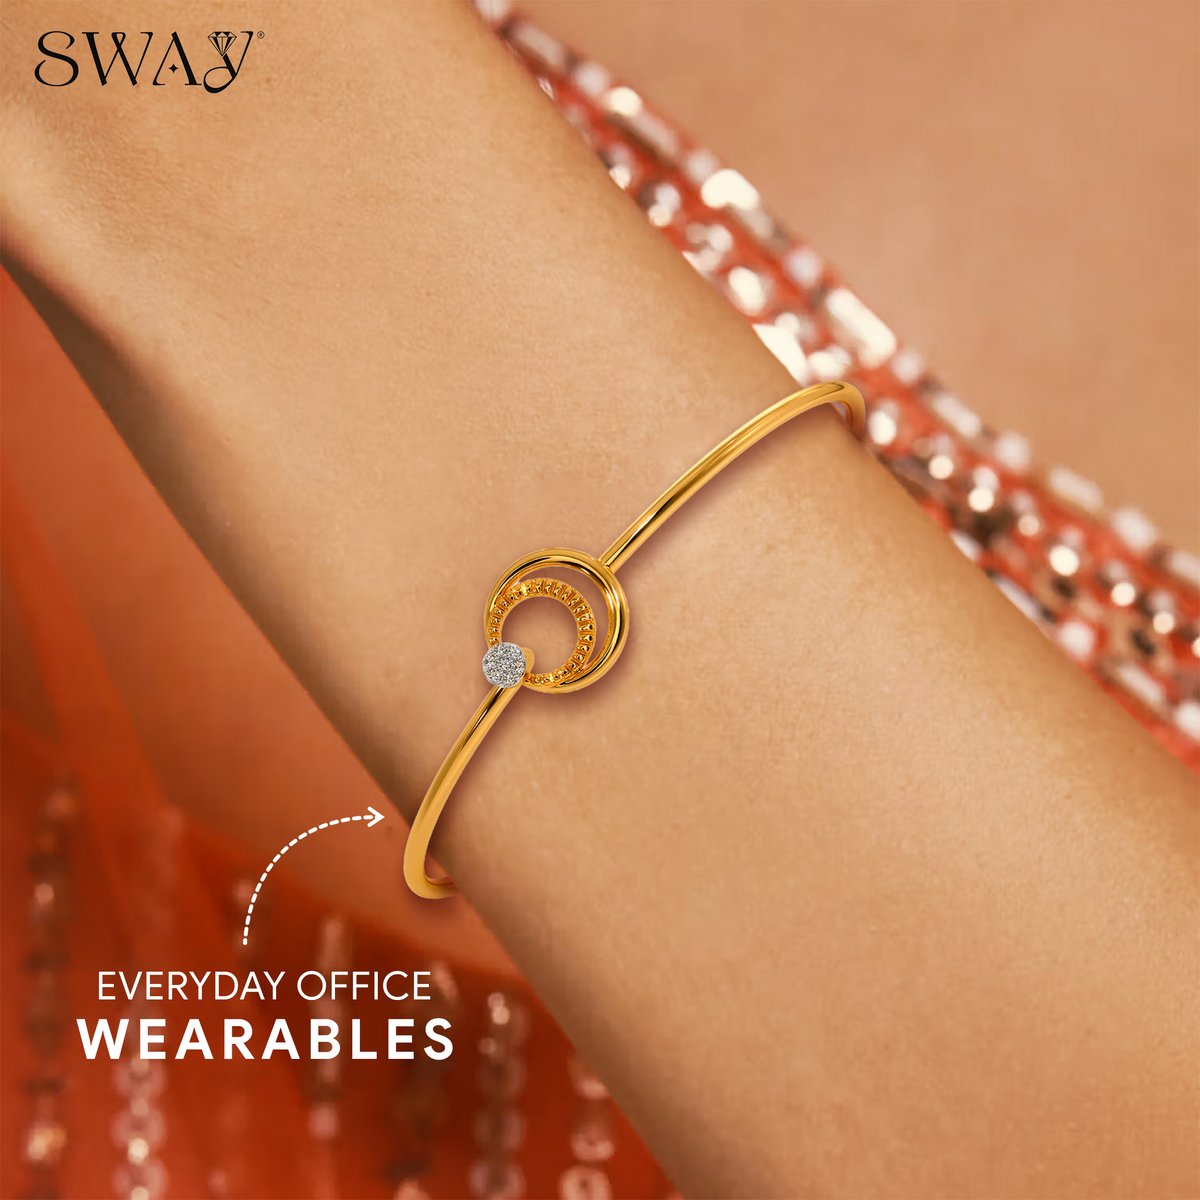 From office to out of the office, these Bracelets will fit perfectly for all your summer plans 📷📷
Take a closer look: tinyurl.com/ycxuuay6

#DiamondBracelets #Diamonds #DiamondRings #DiamondJewelry #OfficeWearJewellery #Bracelets #sway #swayjewels